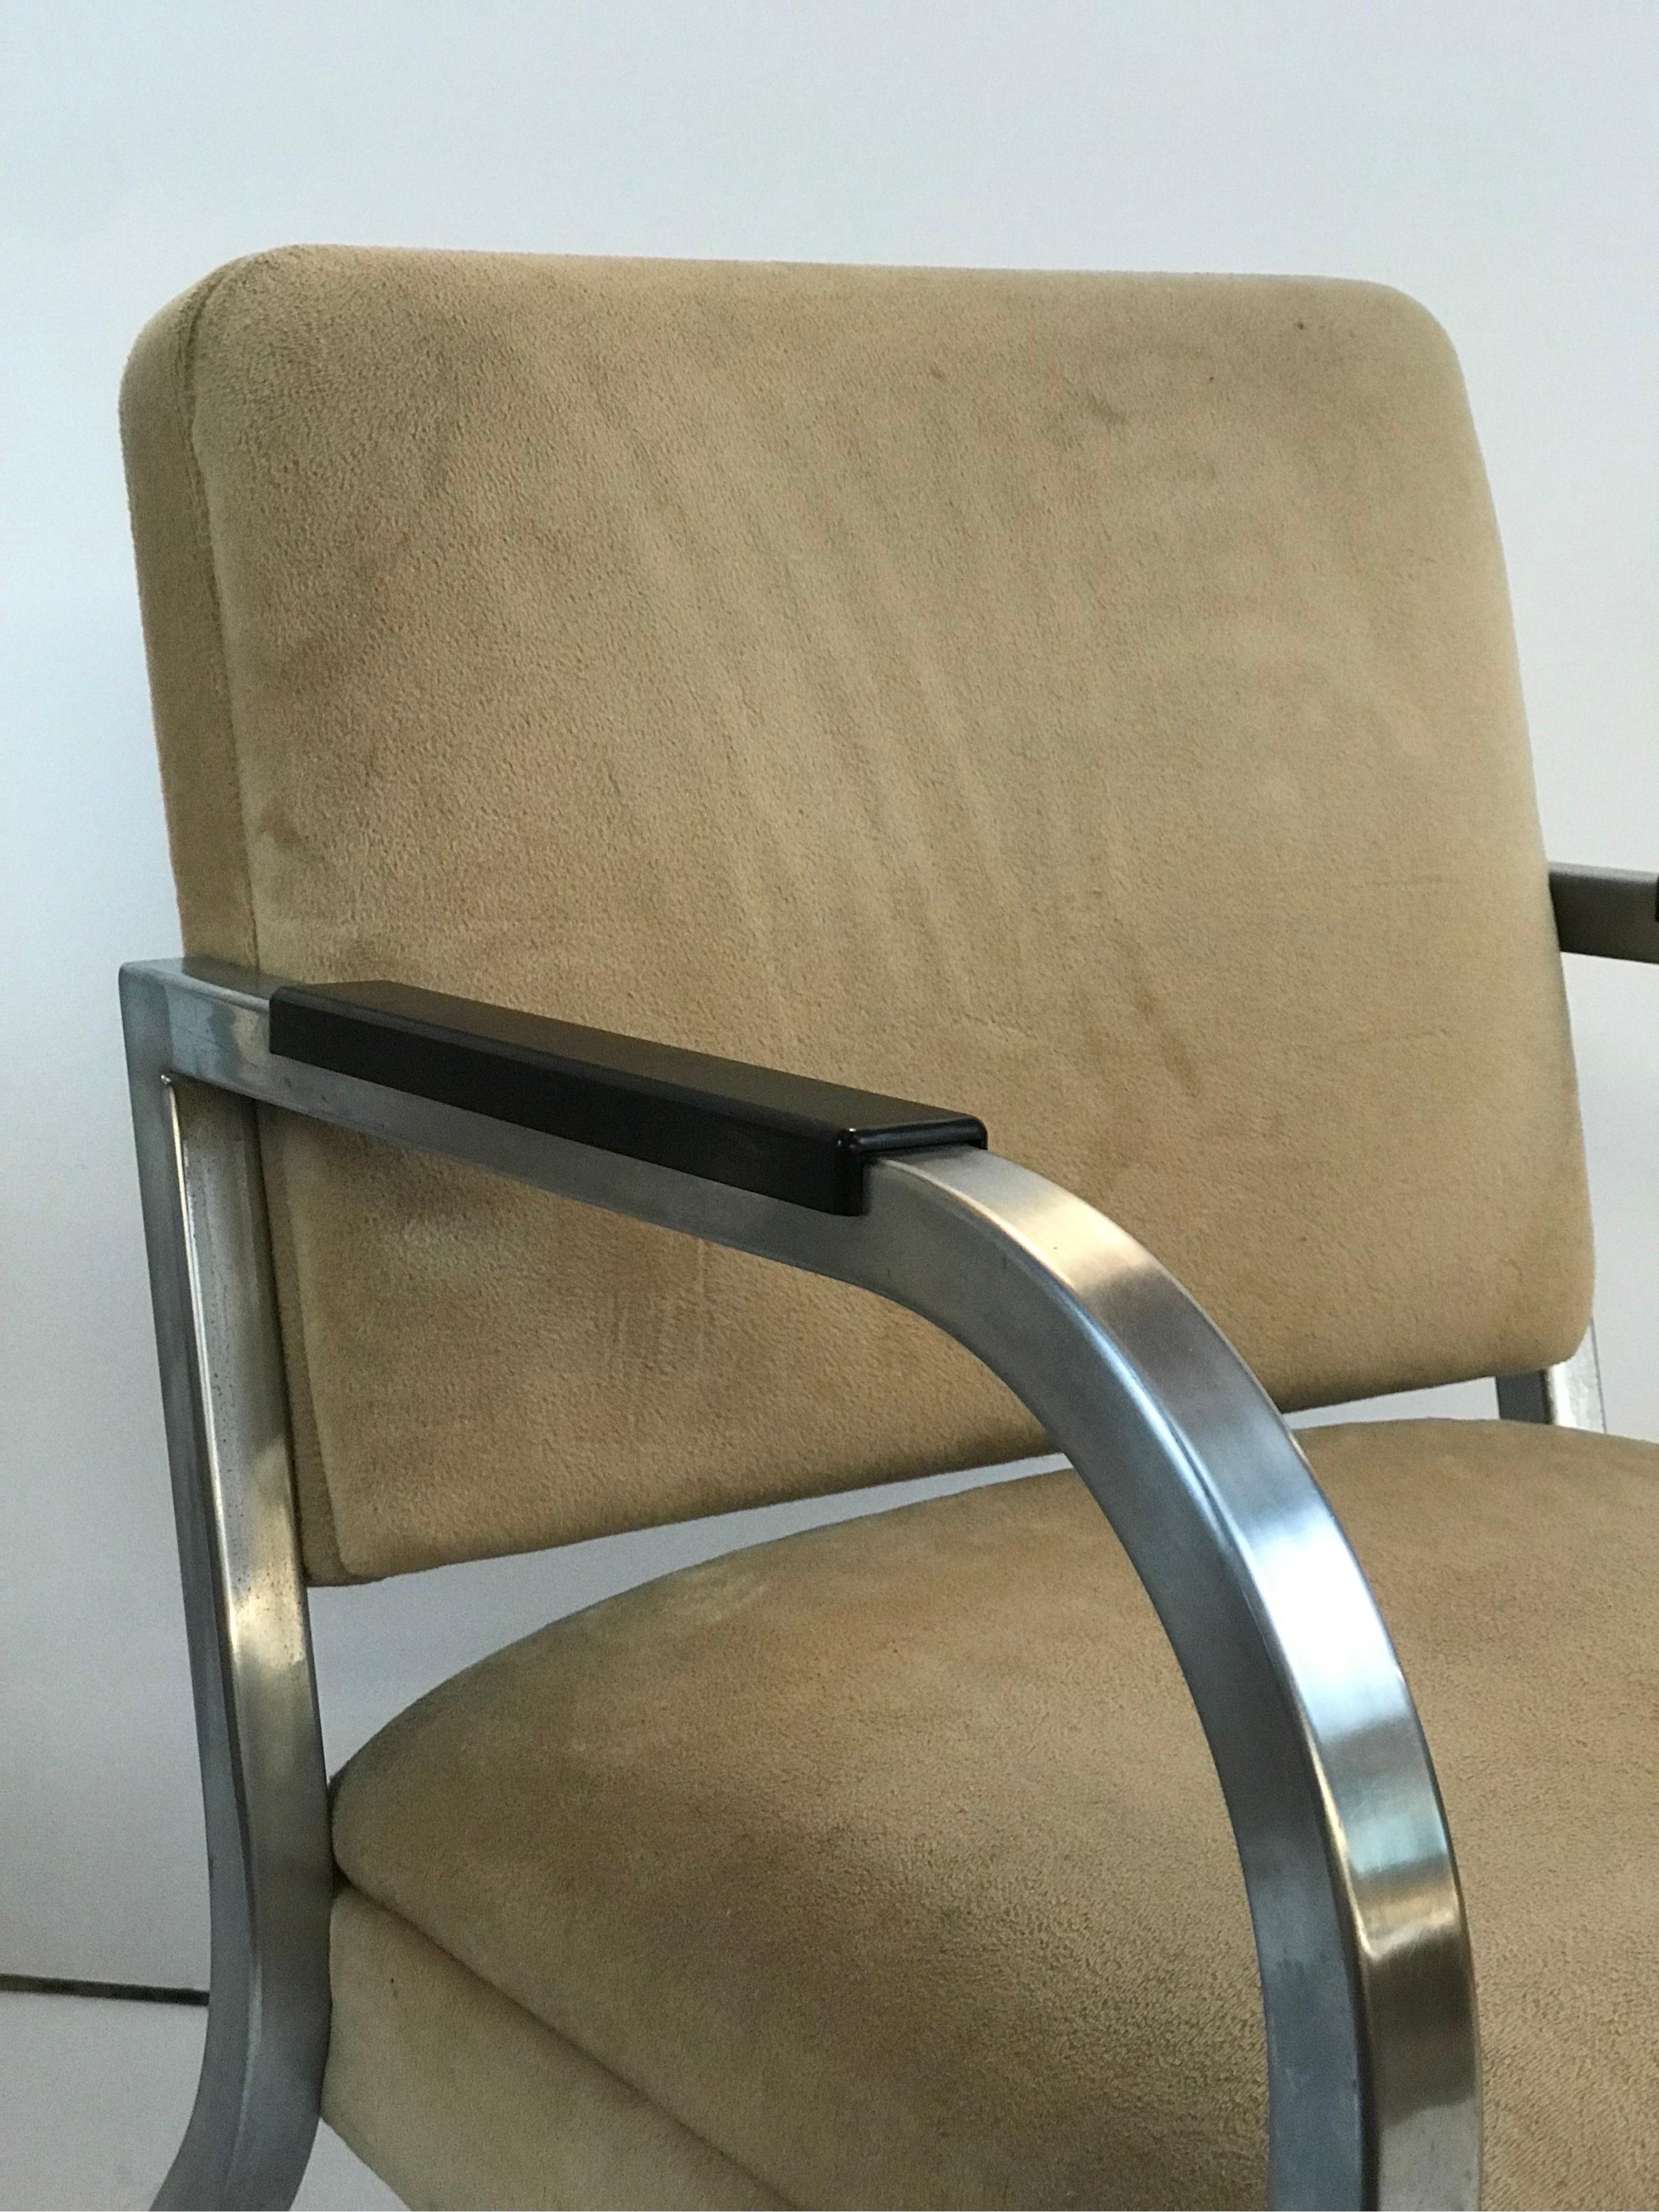 A Pair of Petite Square Tubing 1960's Club Chairs IMO Shaw Walker or Goodform,   3